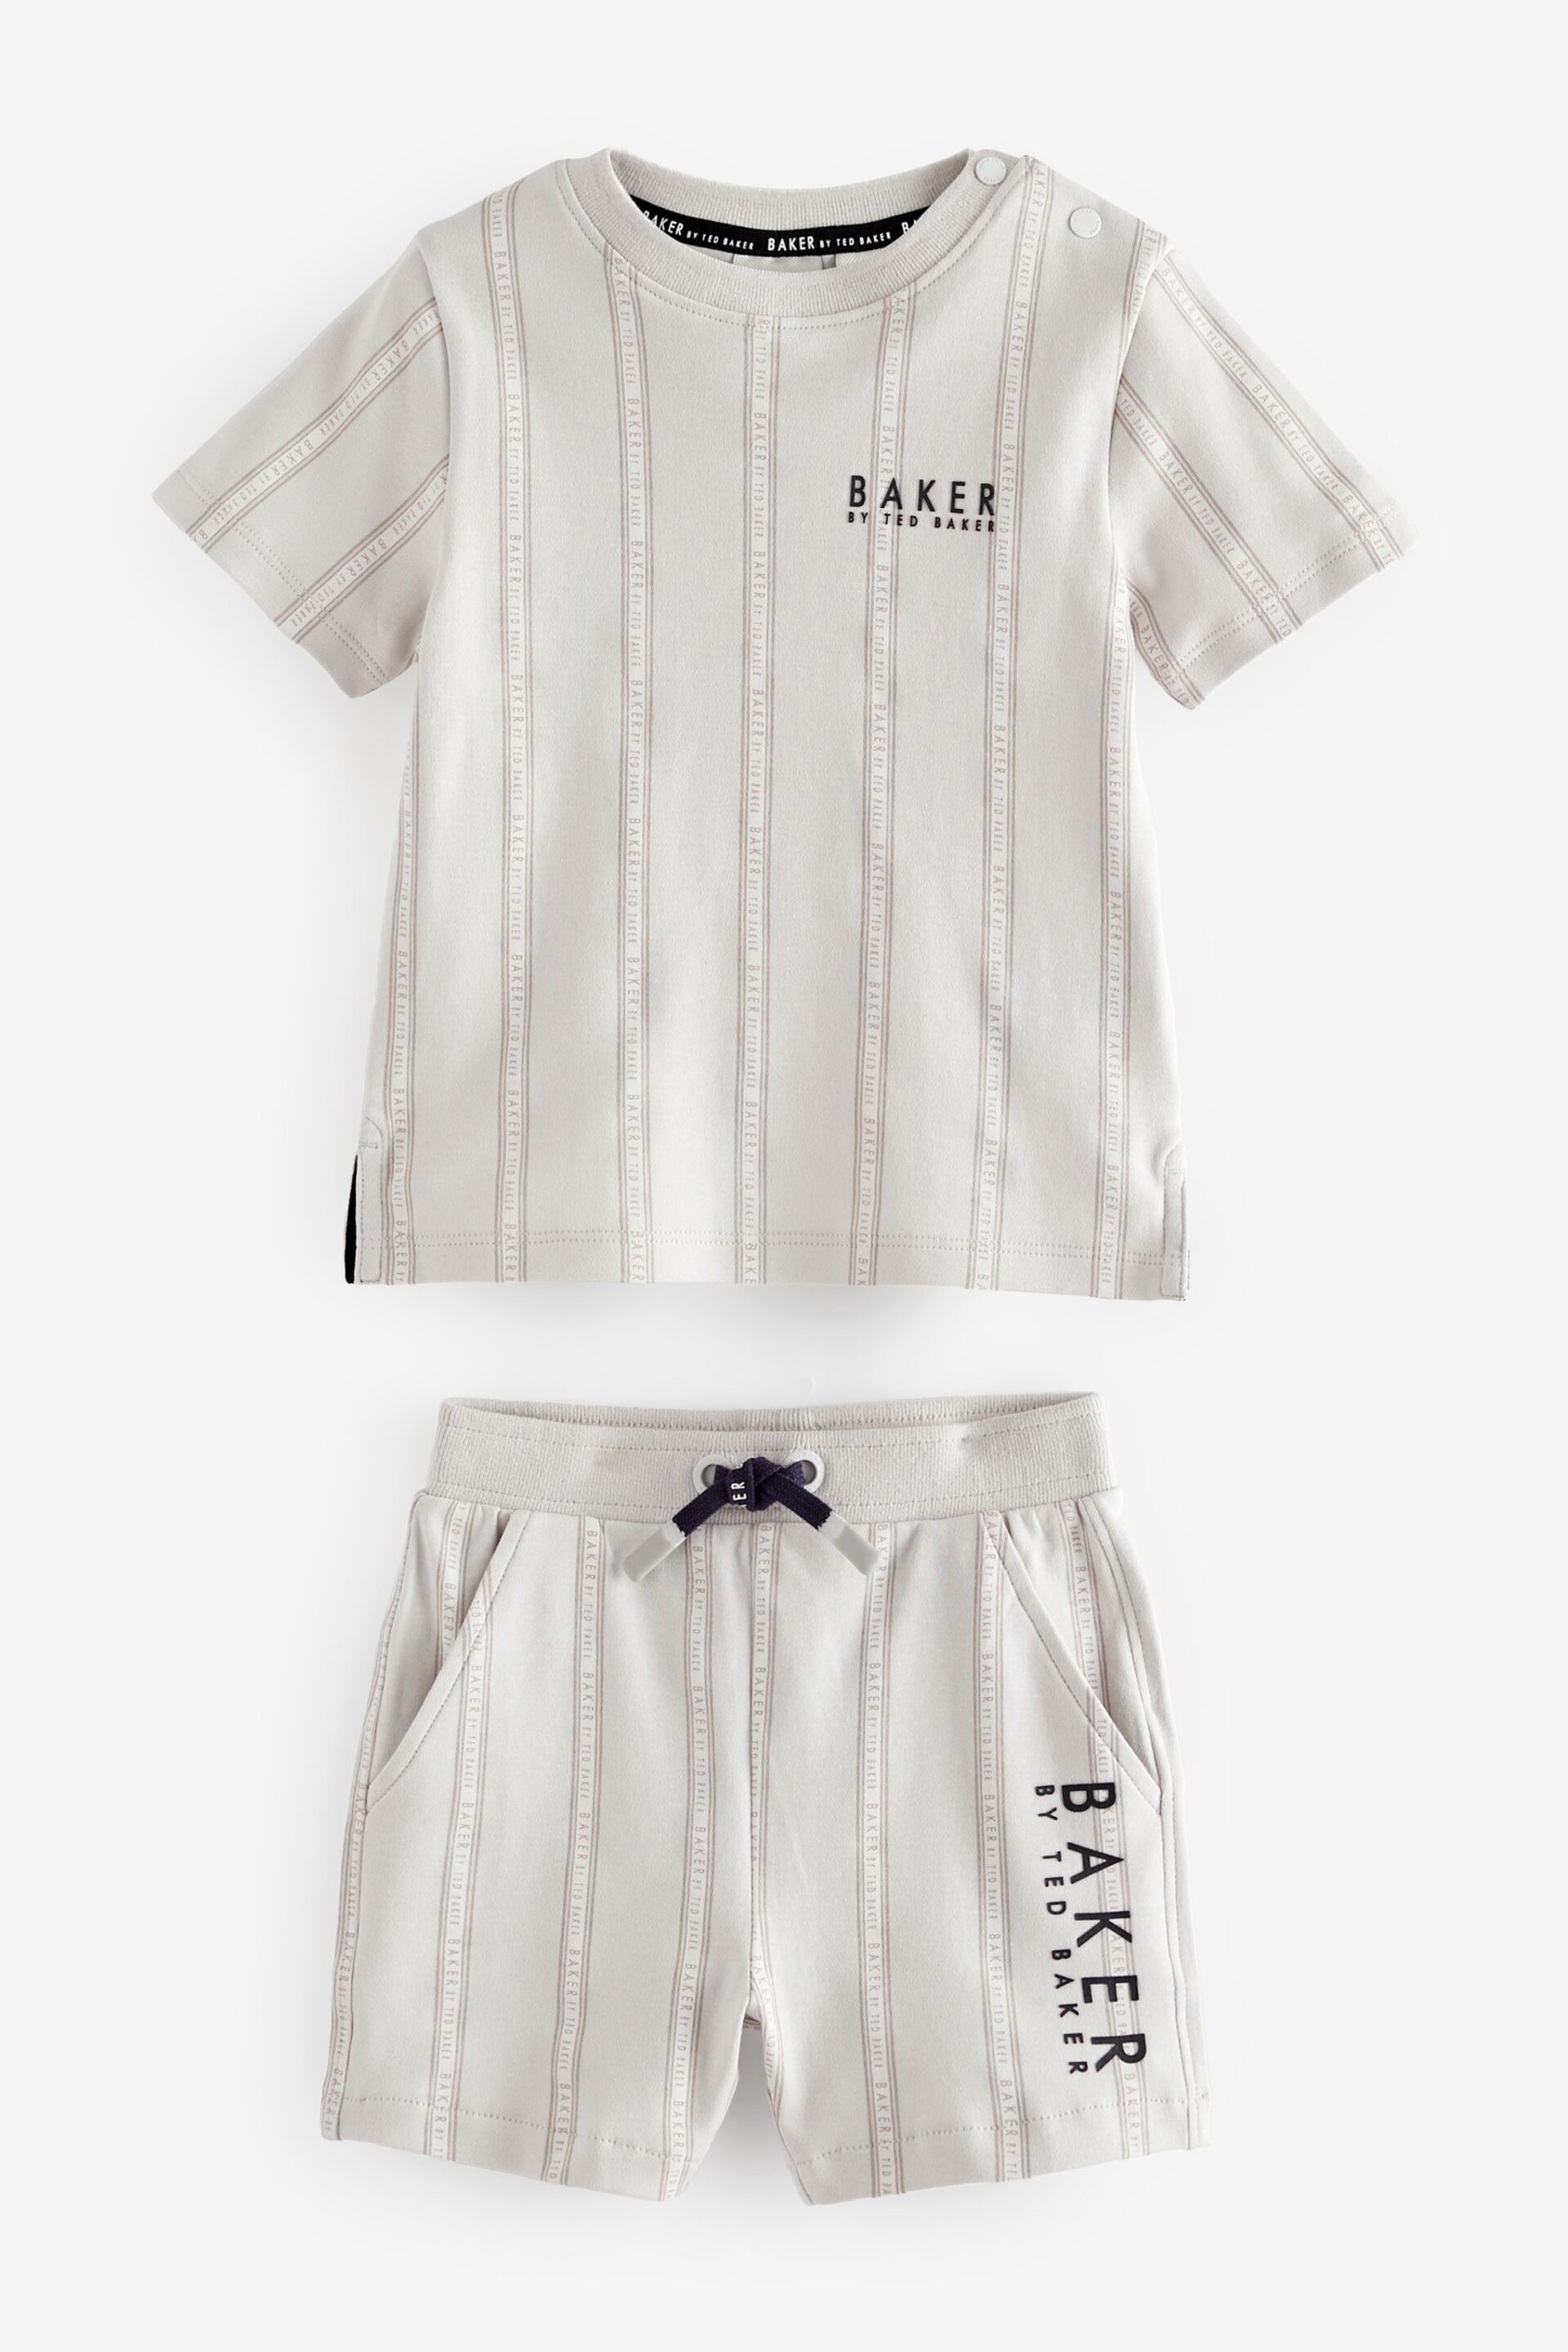 Baker by Ted Baker Striped T-Shirt and Shorts Set - Image 6 of 9